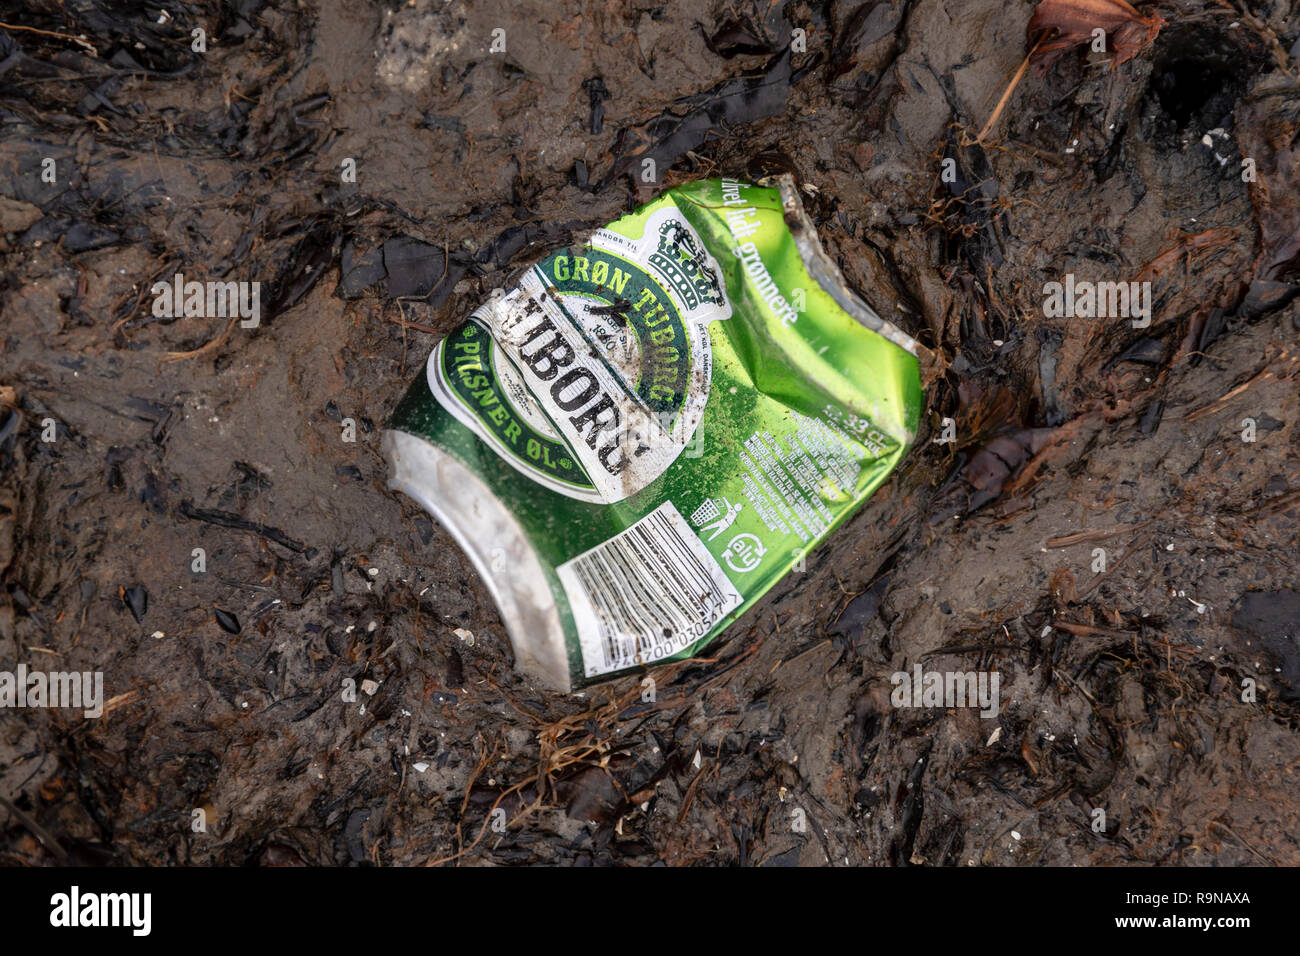 Squashed Tuborg beer can in mud Stock Photo